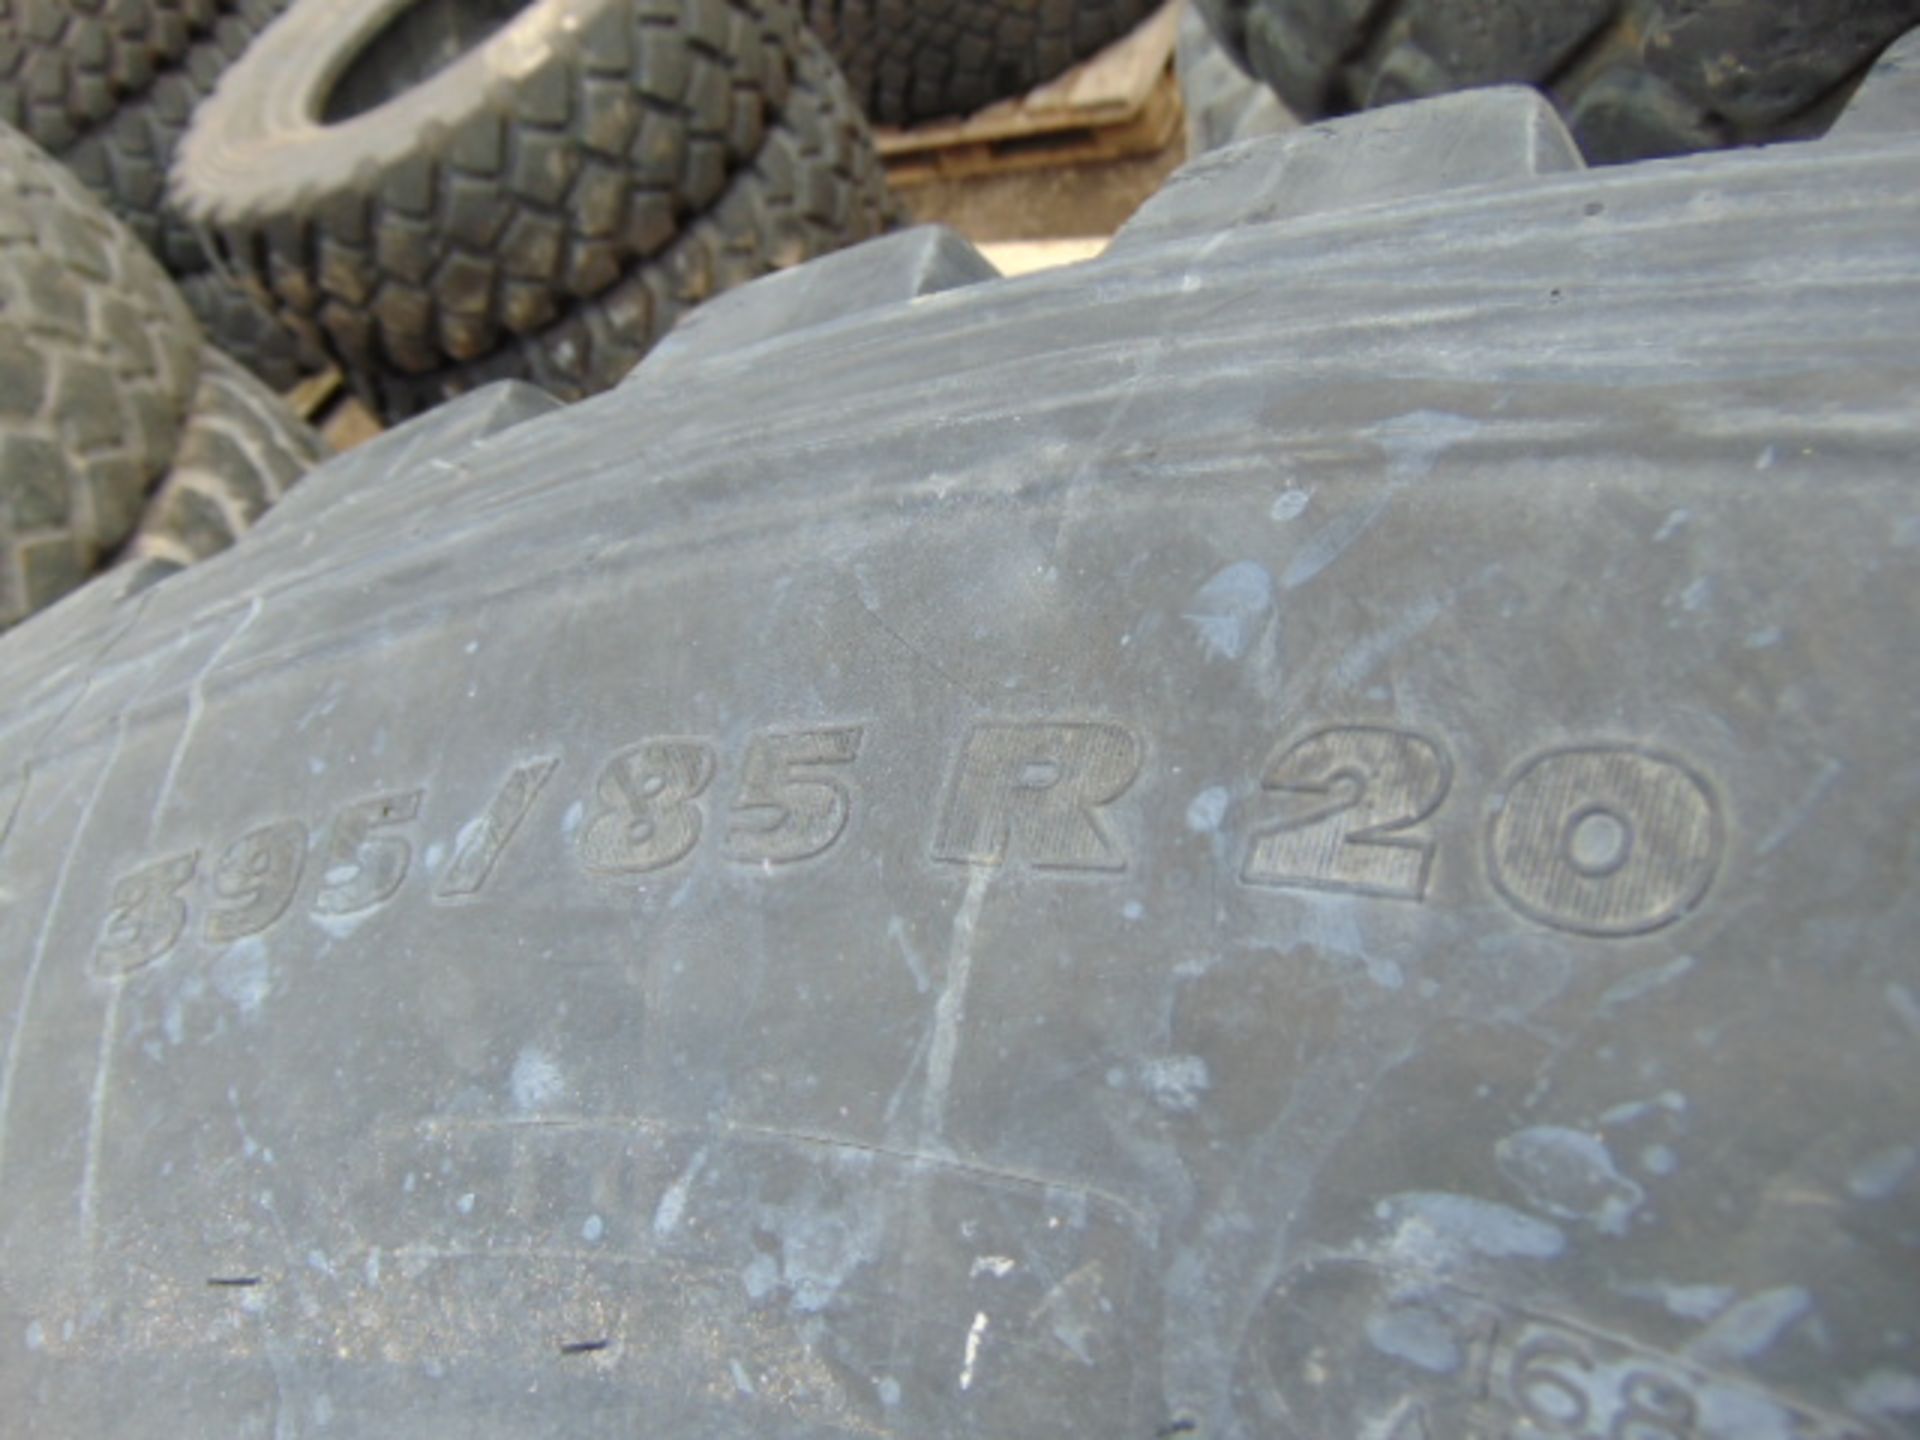 4 x Michelin XZL 395/85 R20 Tyres - Image 7 of 7